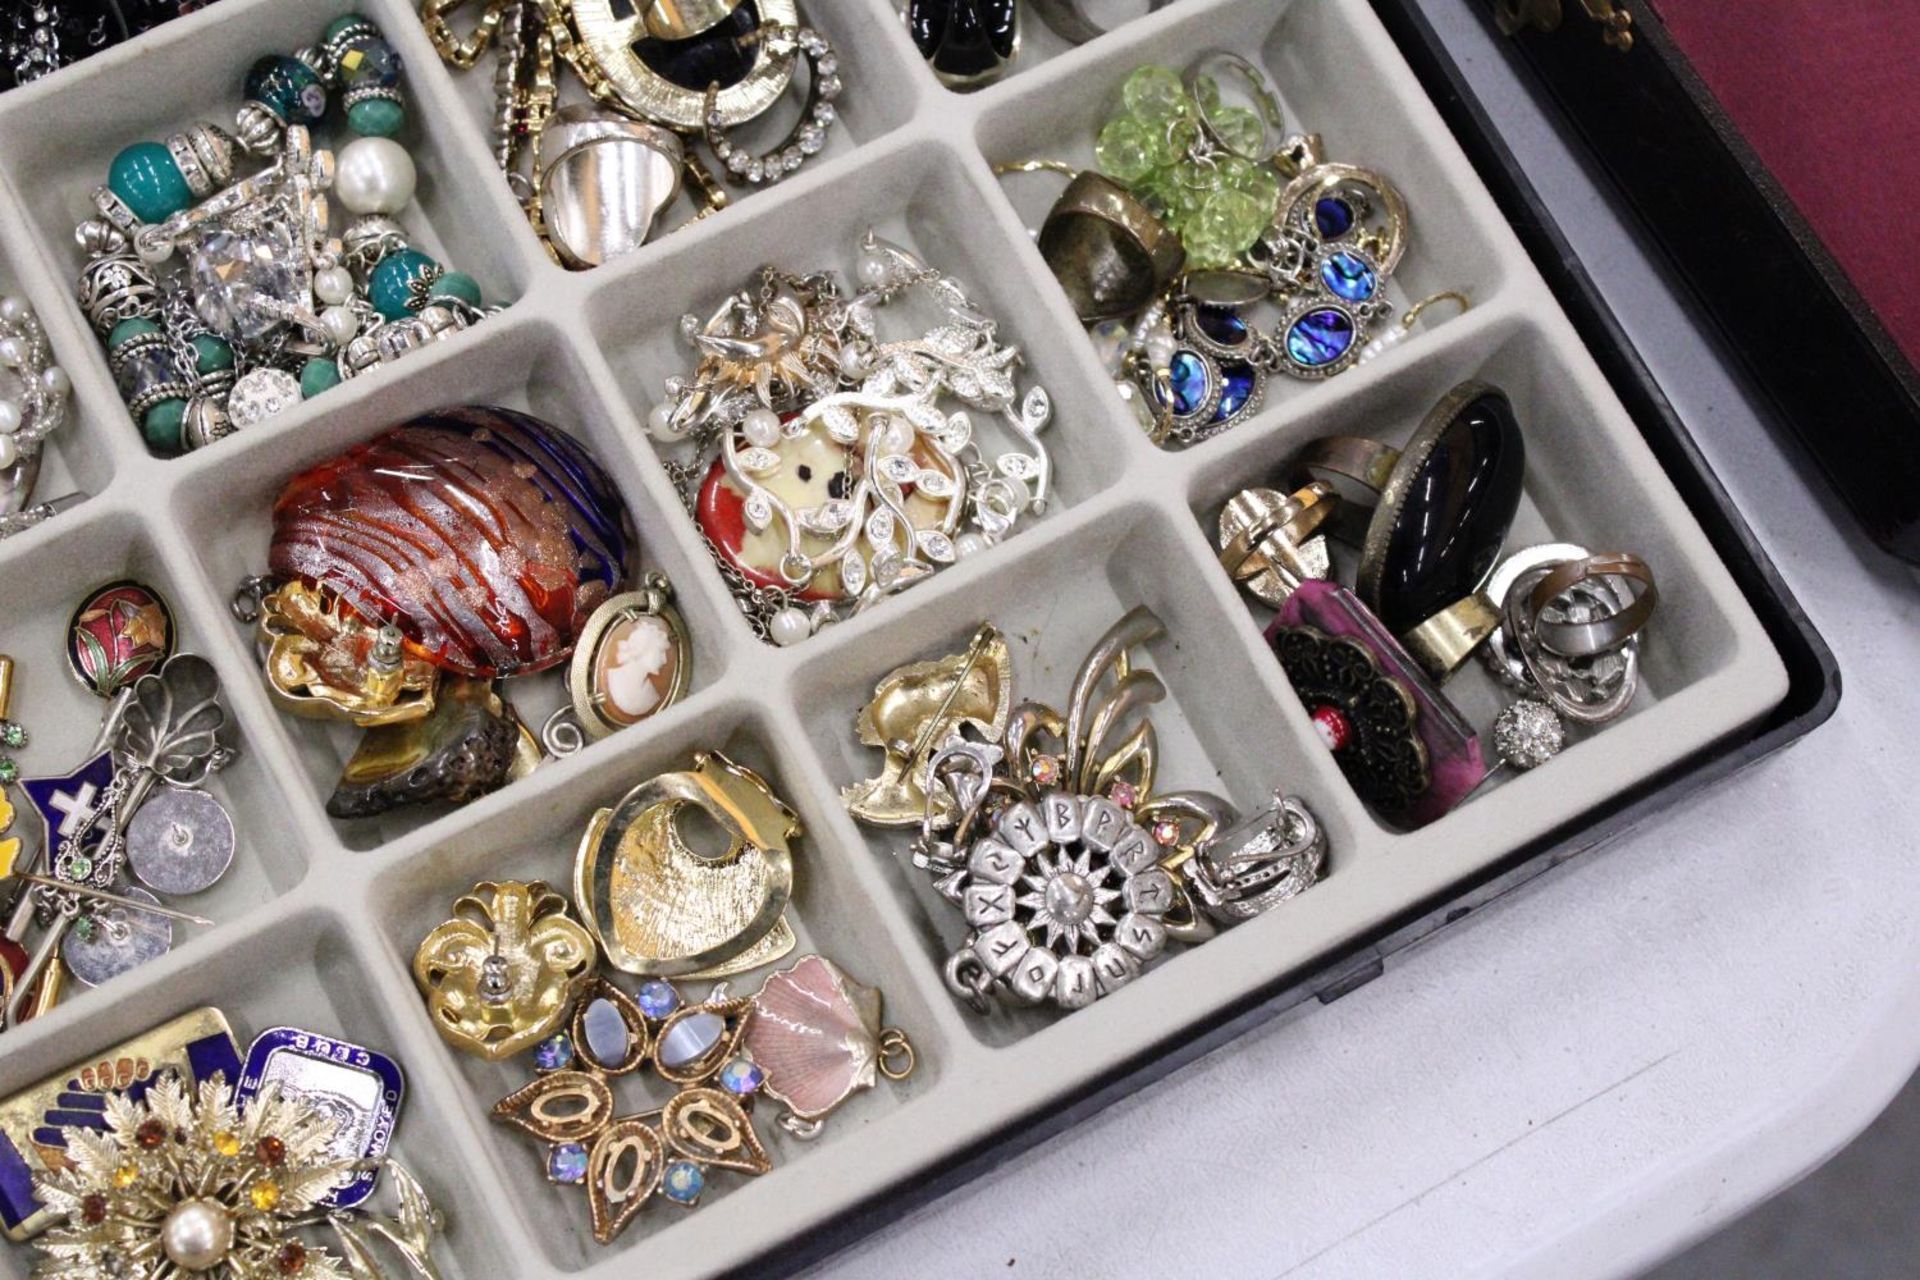 A QUANTITY OF COSTUME JEWELLERY IN DISPLAY CASE - Image 4 of 5